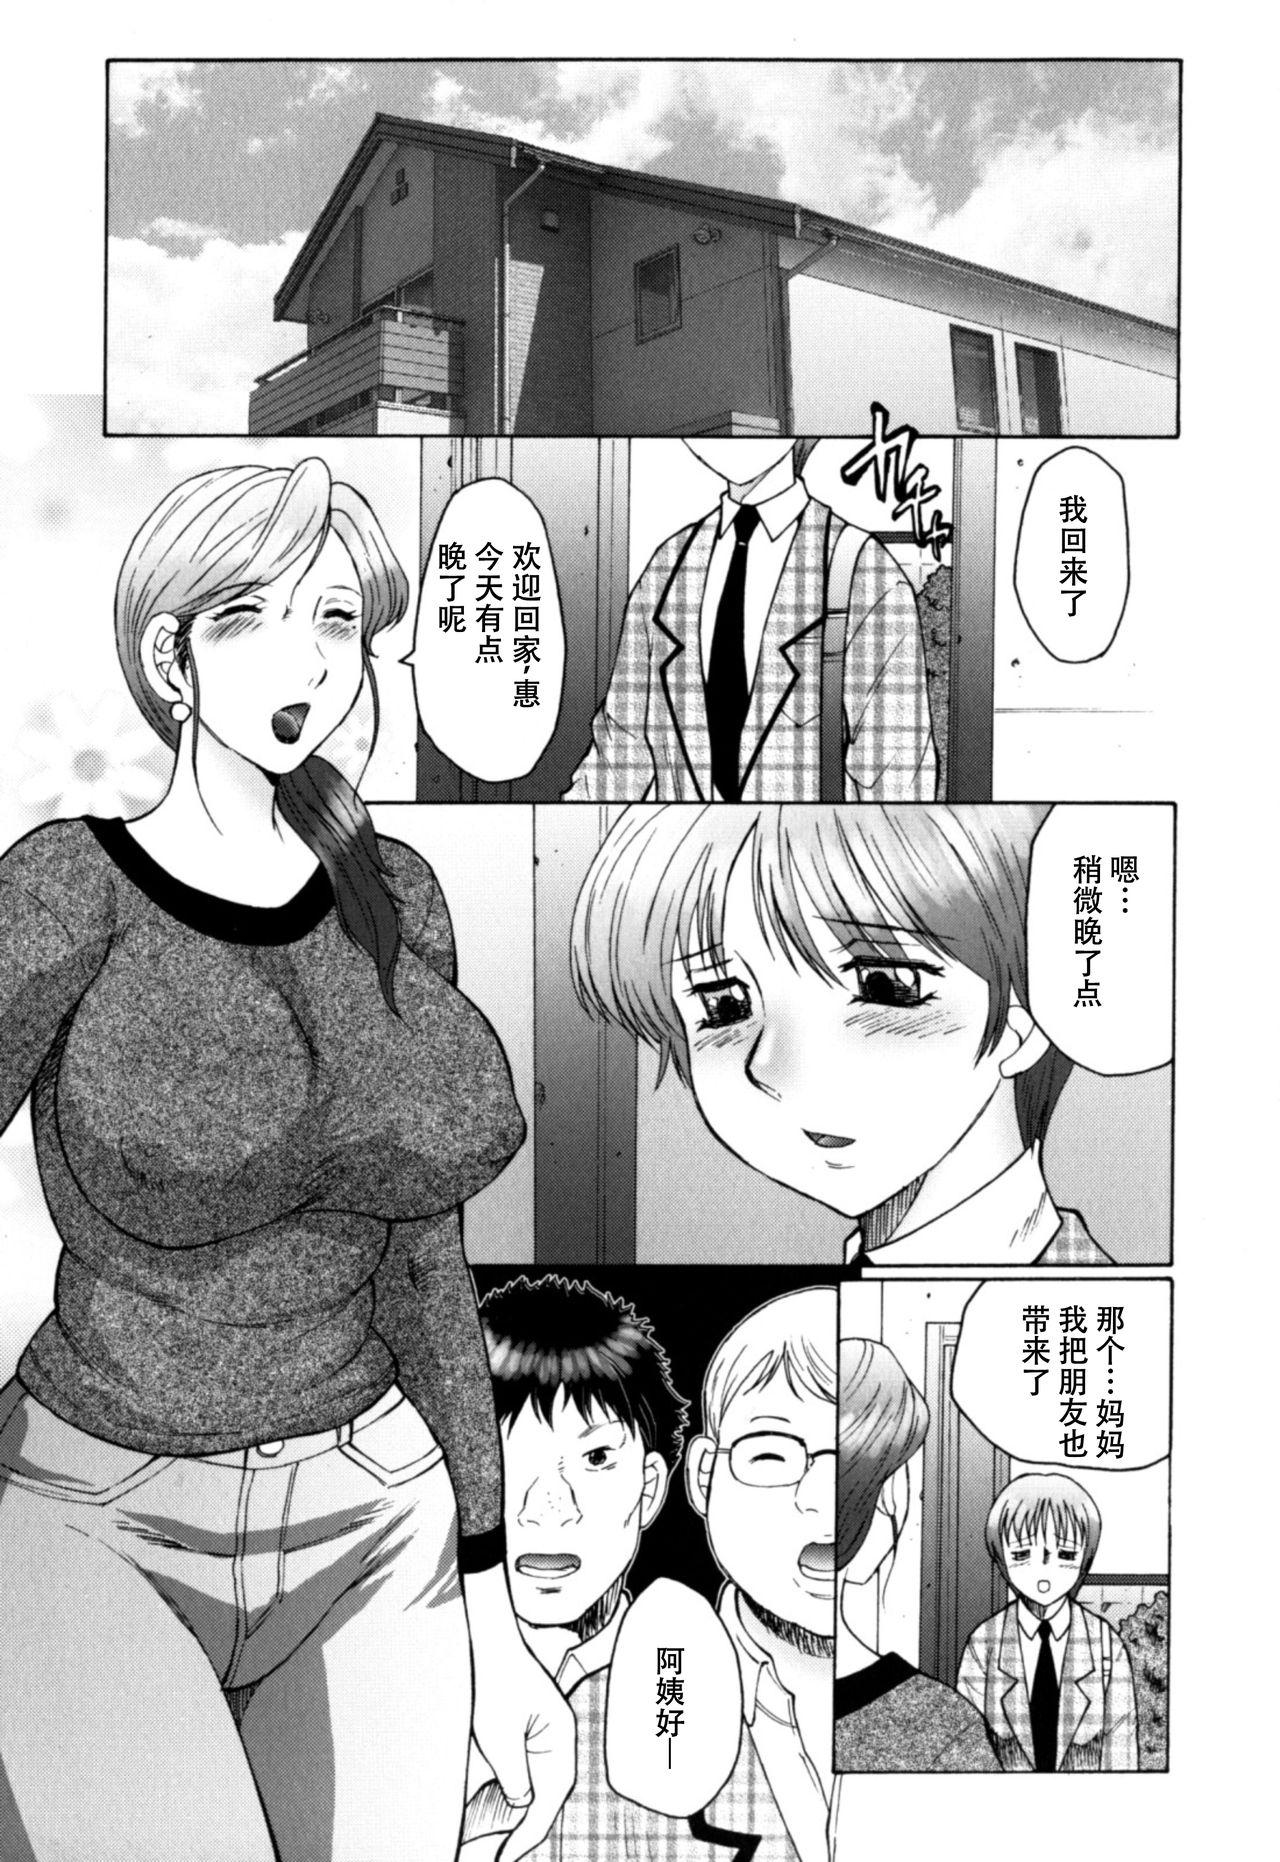 Vip [Fuusen Club] Haha Mamire Ch. 1 [Chinese]【不可视汉化】 Cowgirl - Page 4